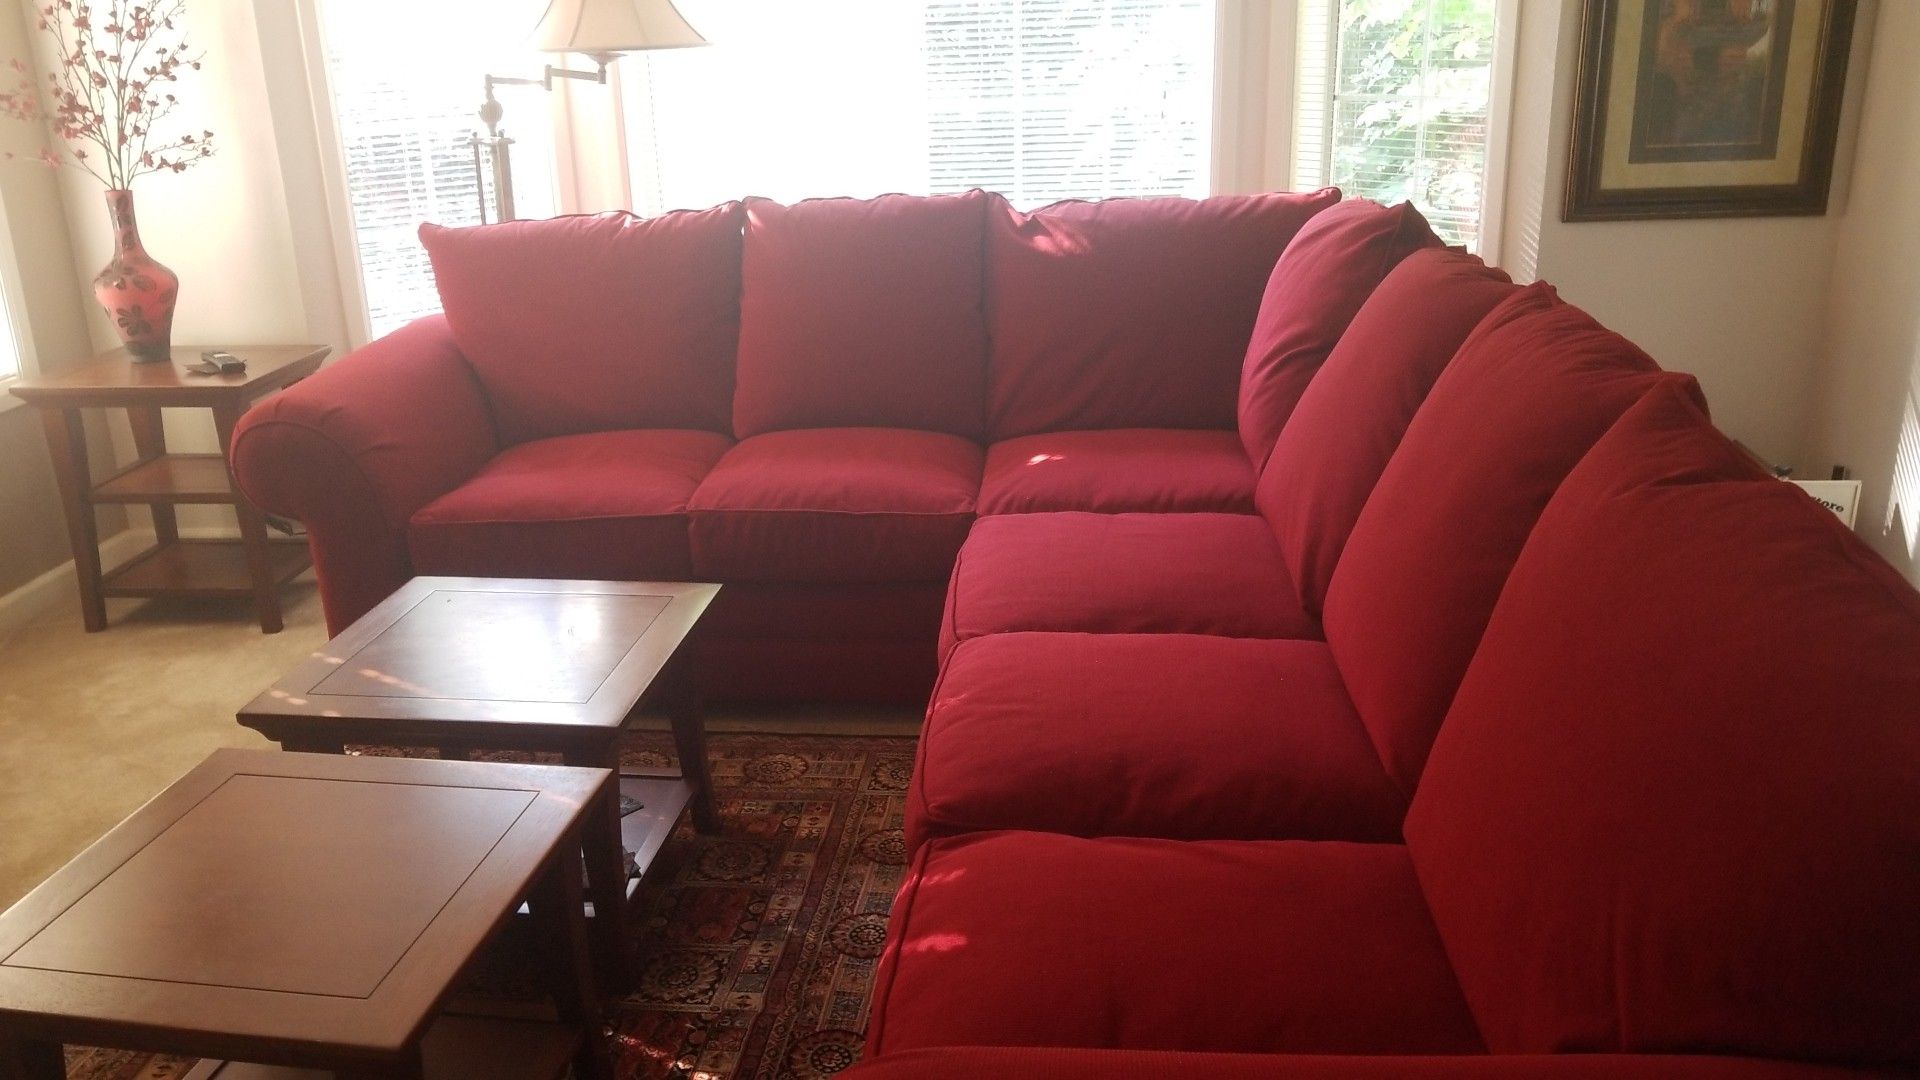 Couch, sectional sofa 2 piece,